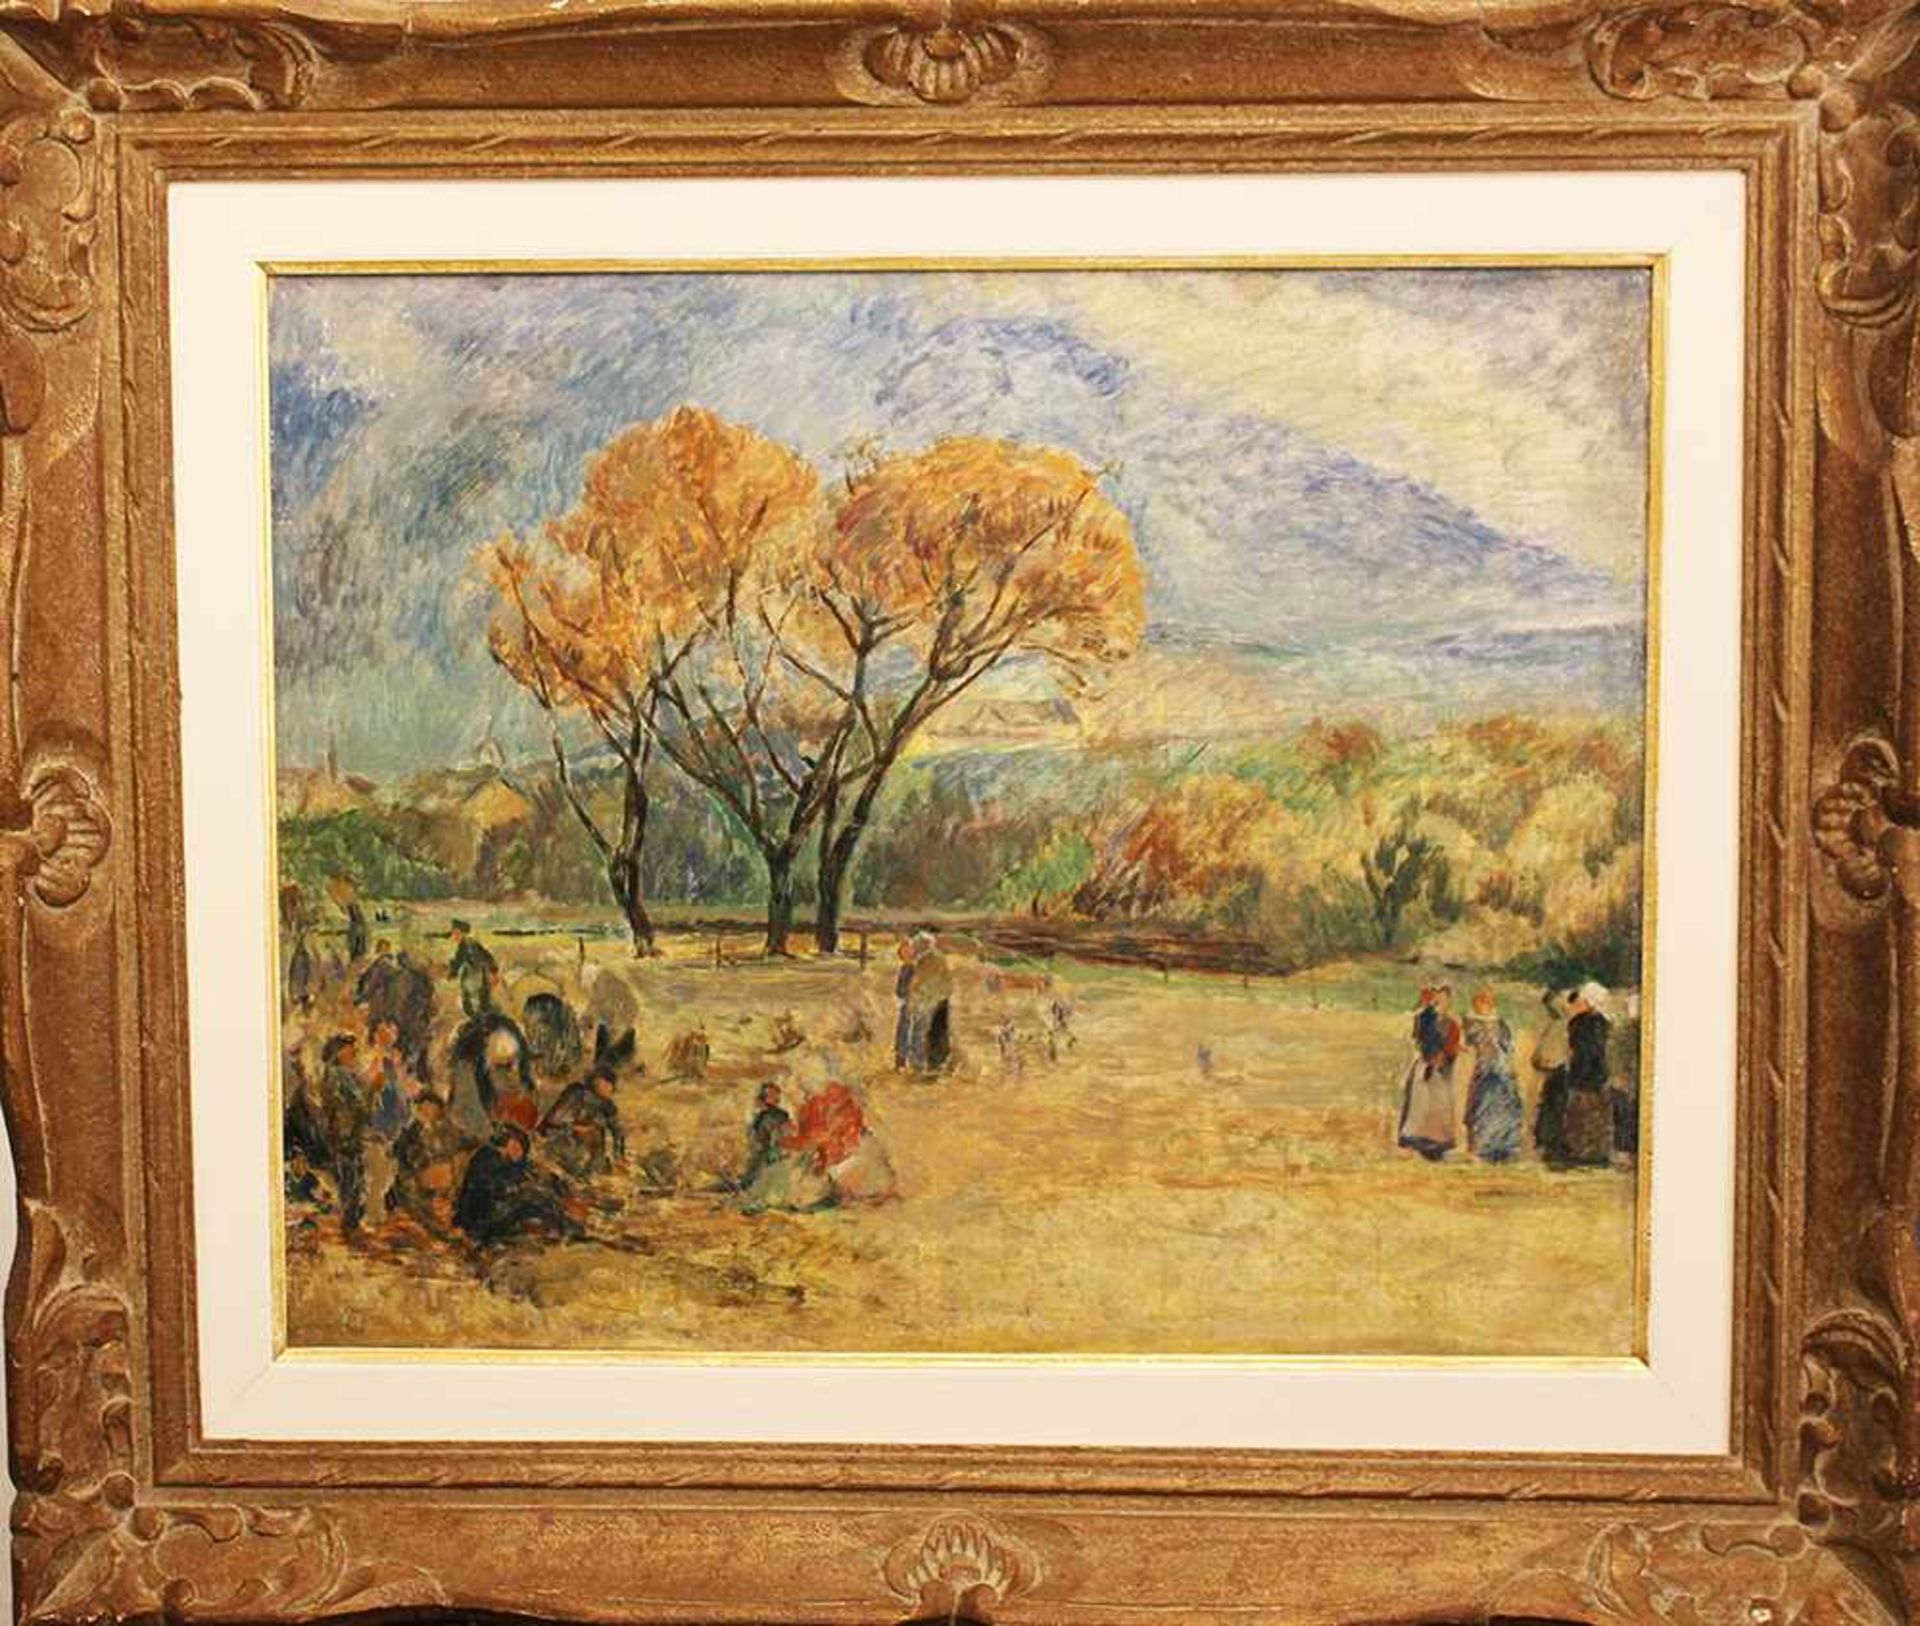 Oldrich Blazicek (1887-1953) – attributed. Landscape with people. Oil on canvas, framed. On the